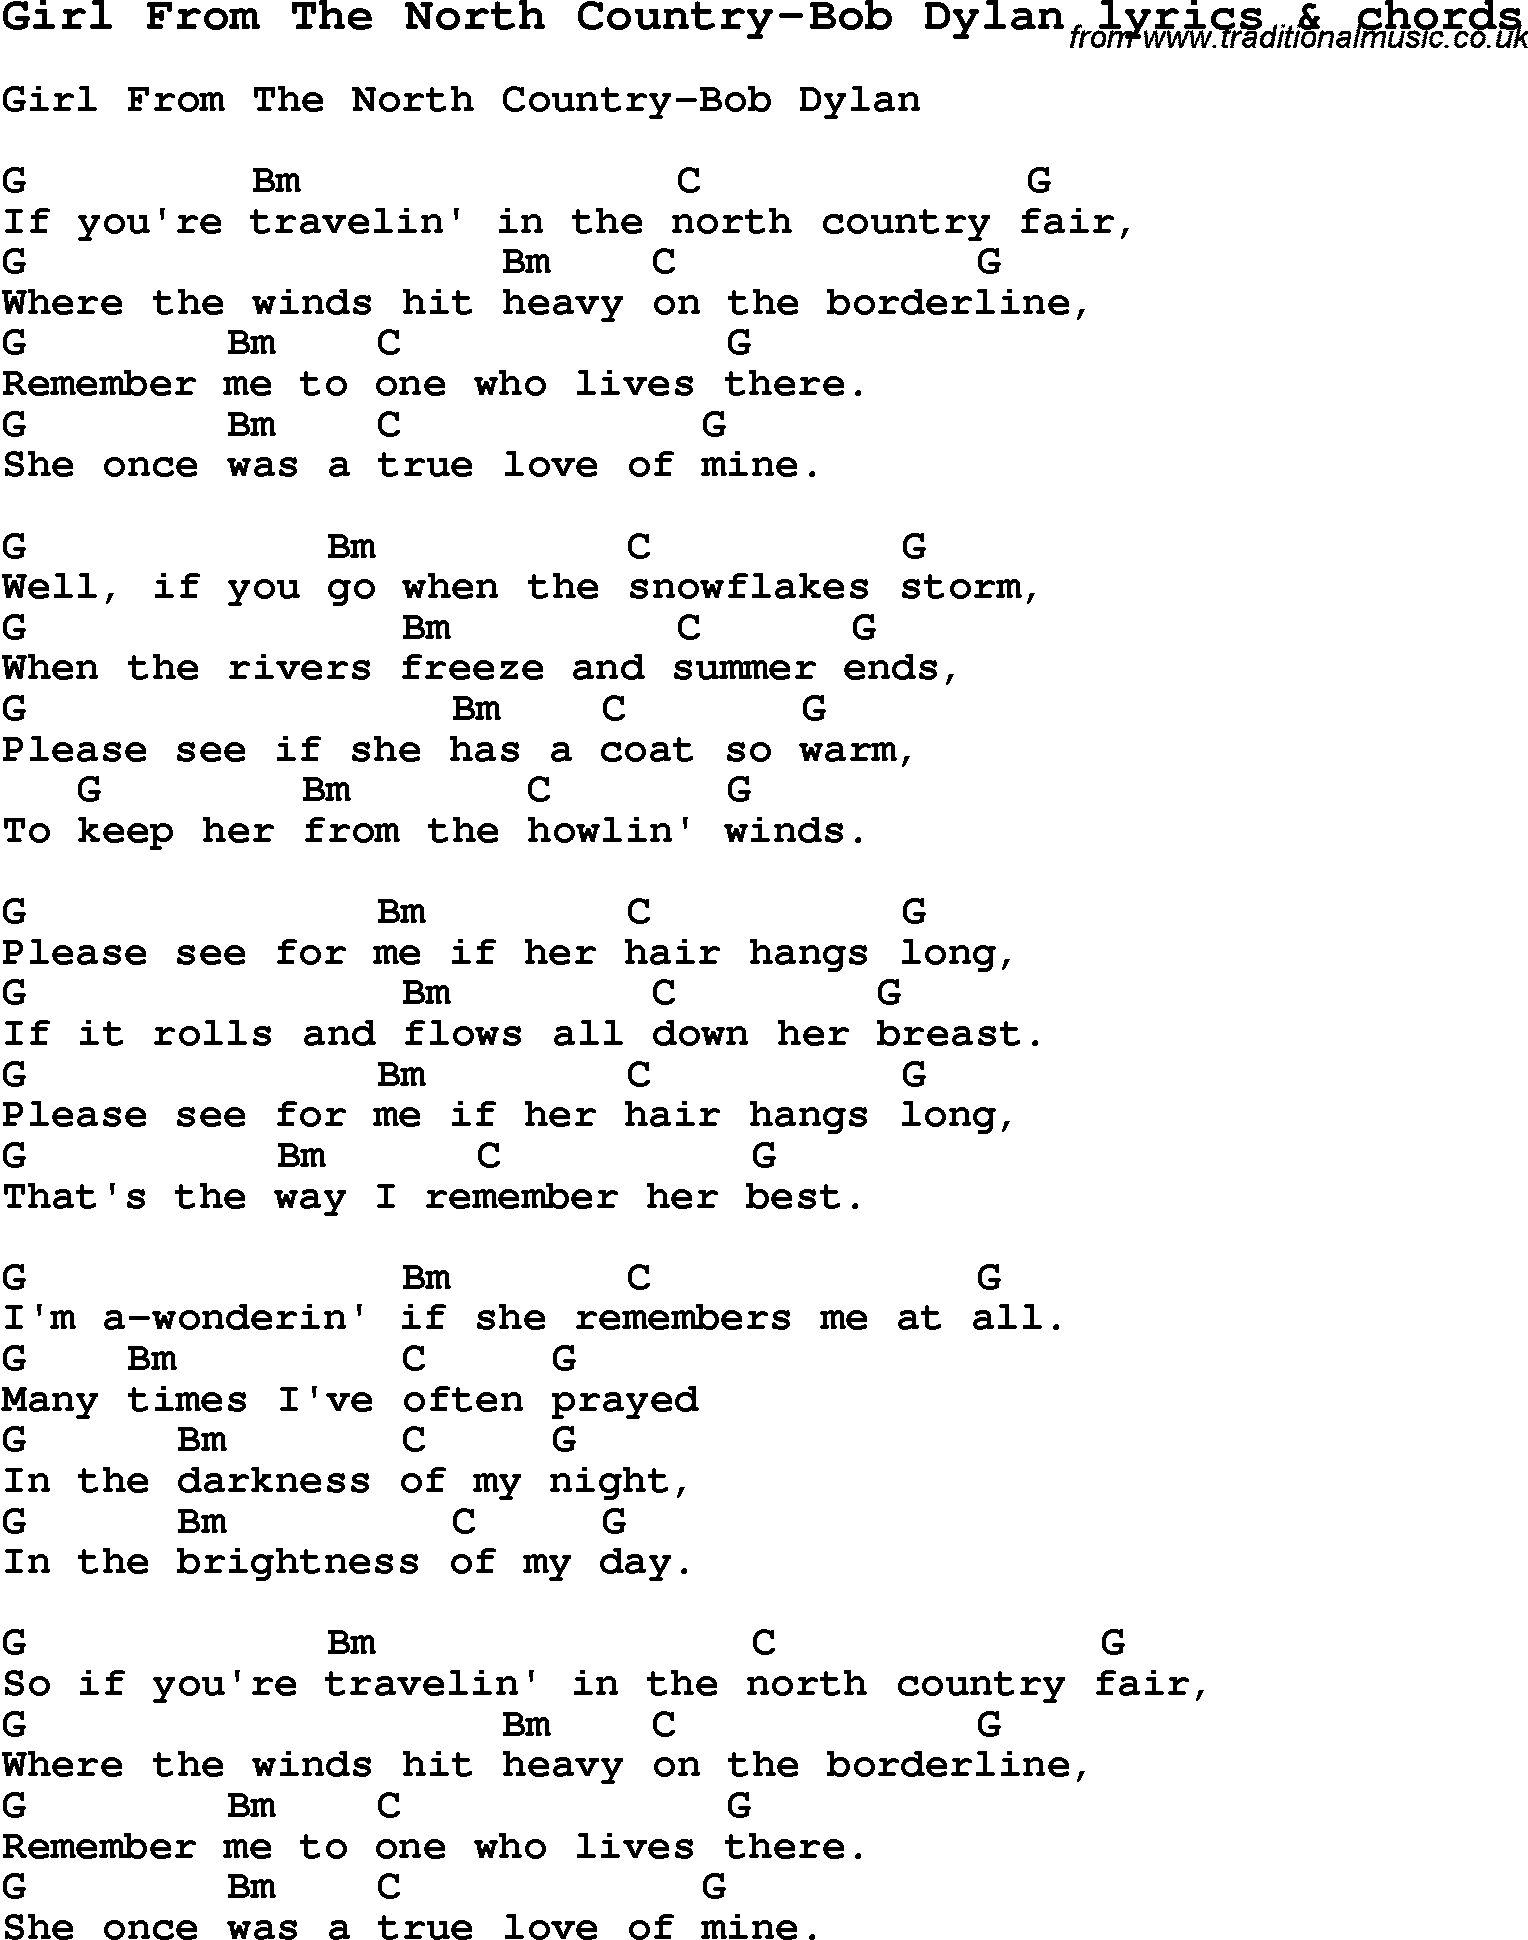 Love Song Lyrics for: Girl From The North Country-Bob Dylan with chords for Ukulele, Guitar Banjo etc.